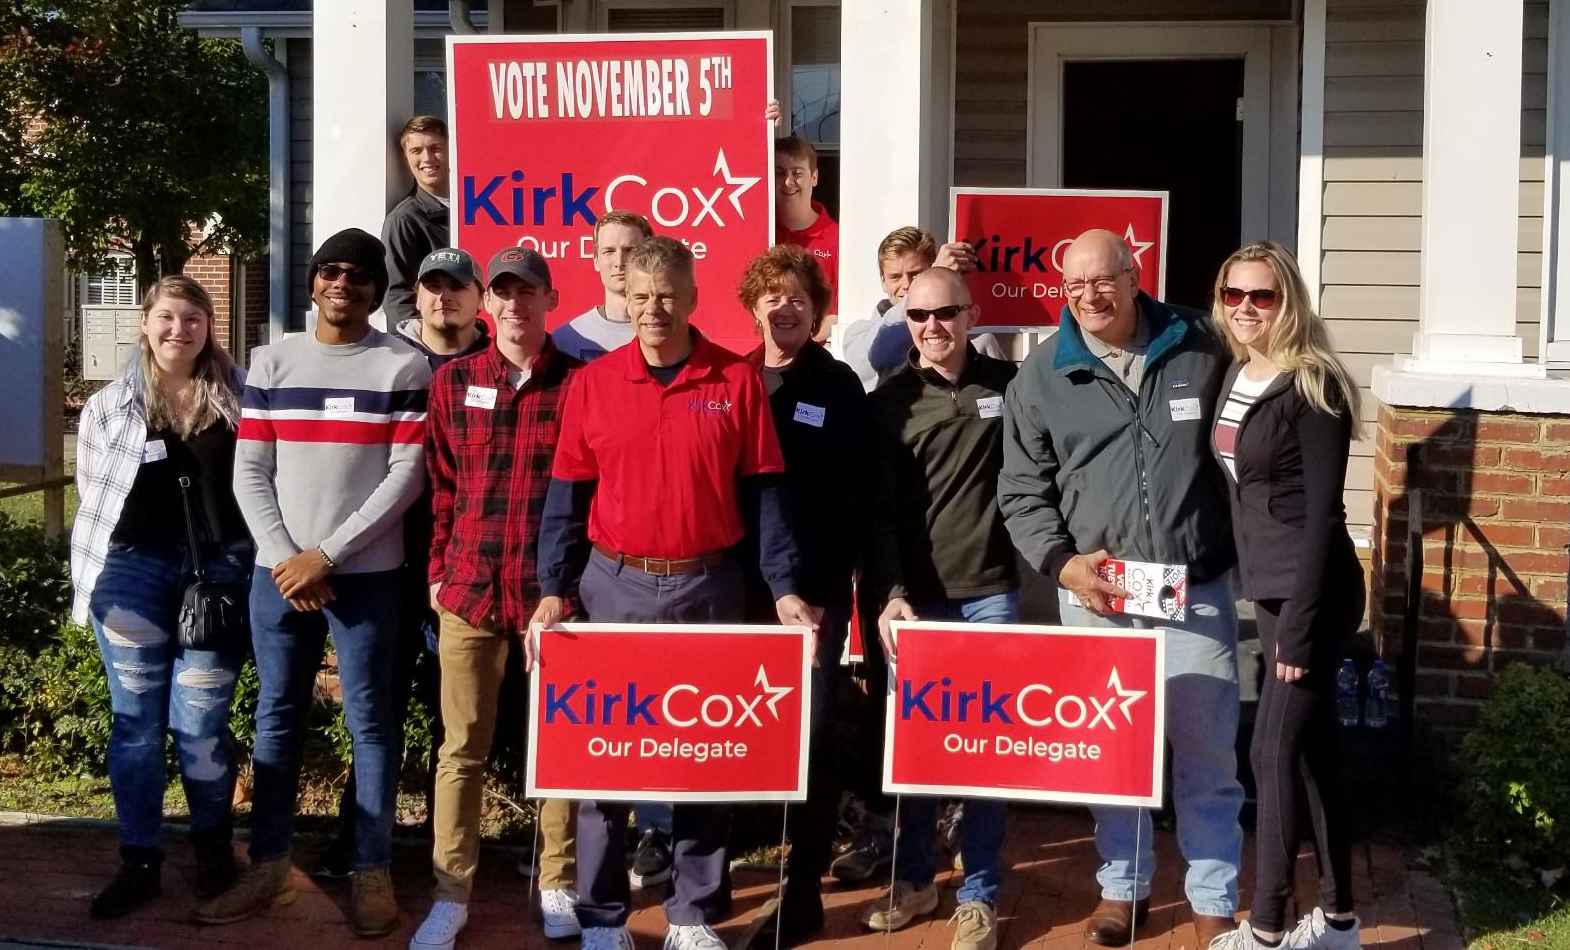 Fort Lee Federal Credit Union's Patsy Stuard and husband, Pat, volunteered on the campaign of Del. Kirk Cox this election season.